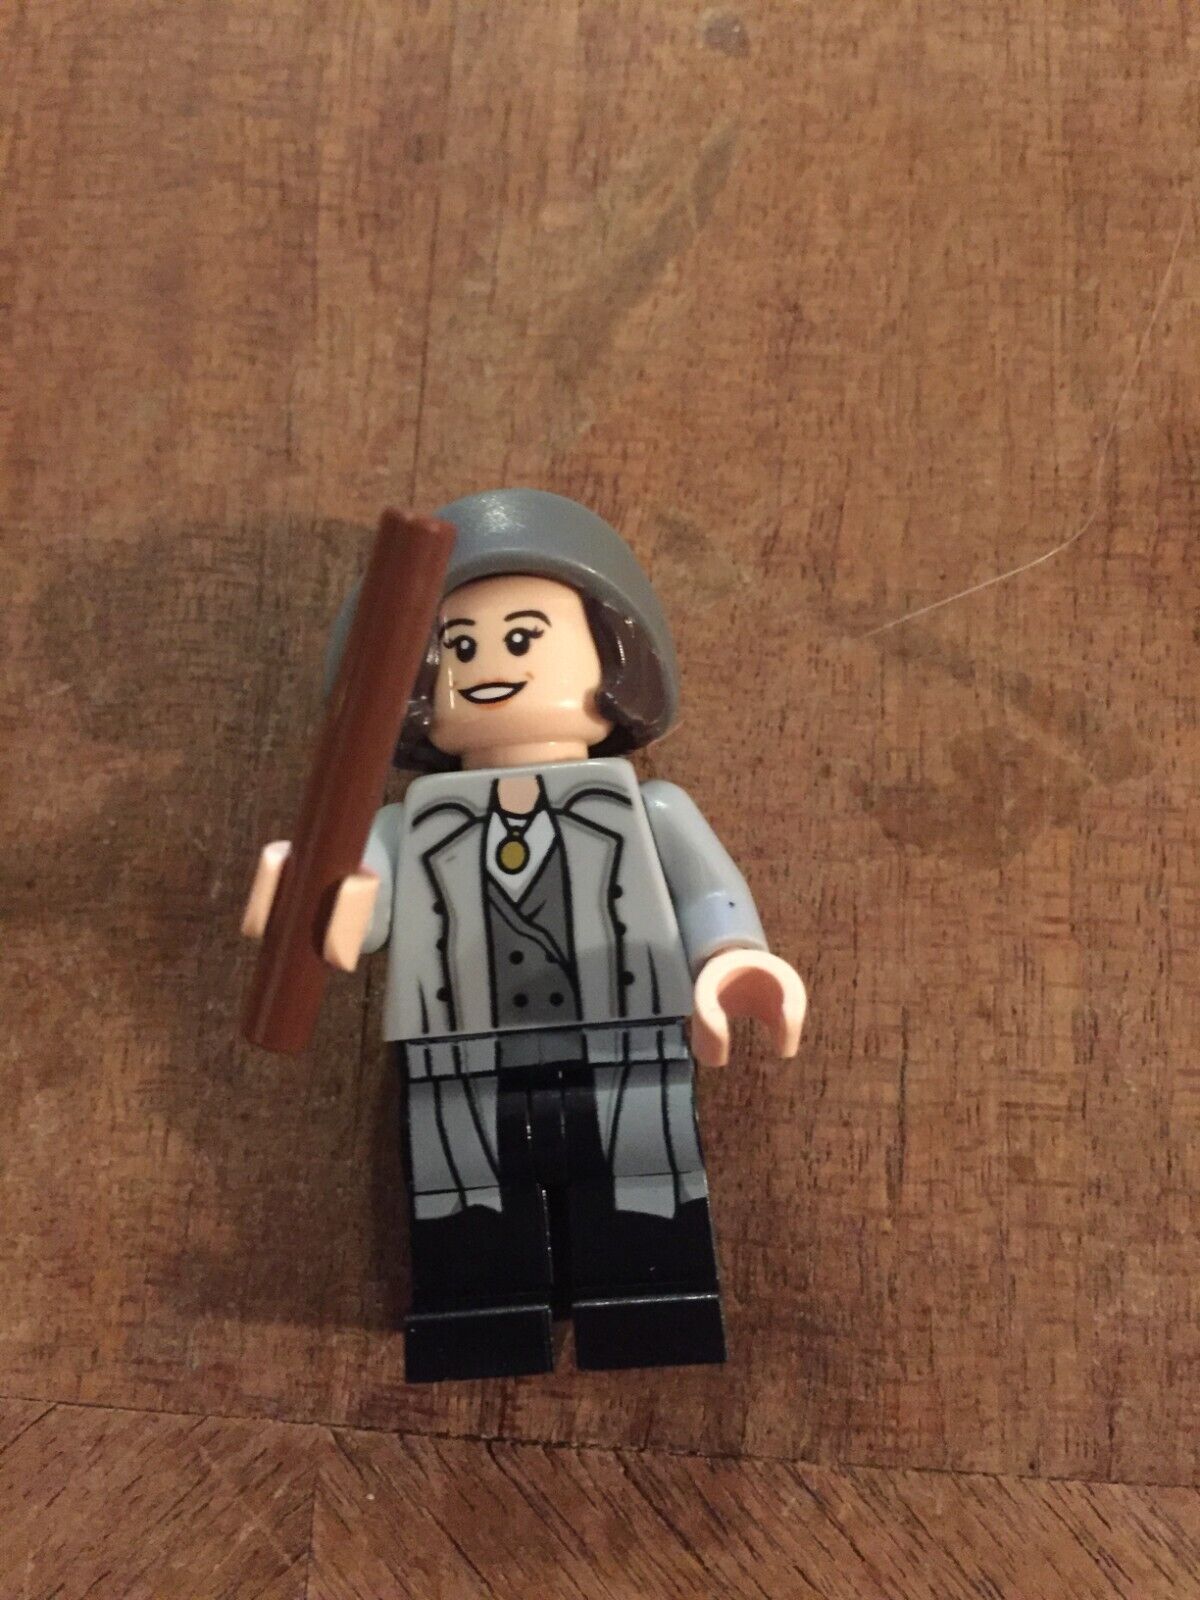 MINIFIGURE KIND:MINIFIGURE TINA GOLDSON 71257:LEGO-DIMENSIONS- MINIFIGURES- TOY TAGS- BUILDS- YOU PICK FROM LIST- CHOOSE